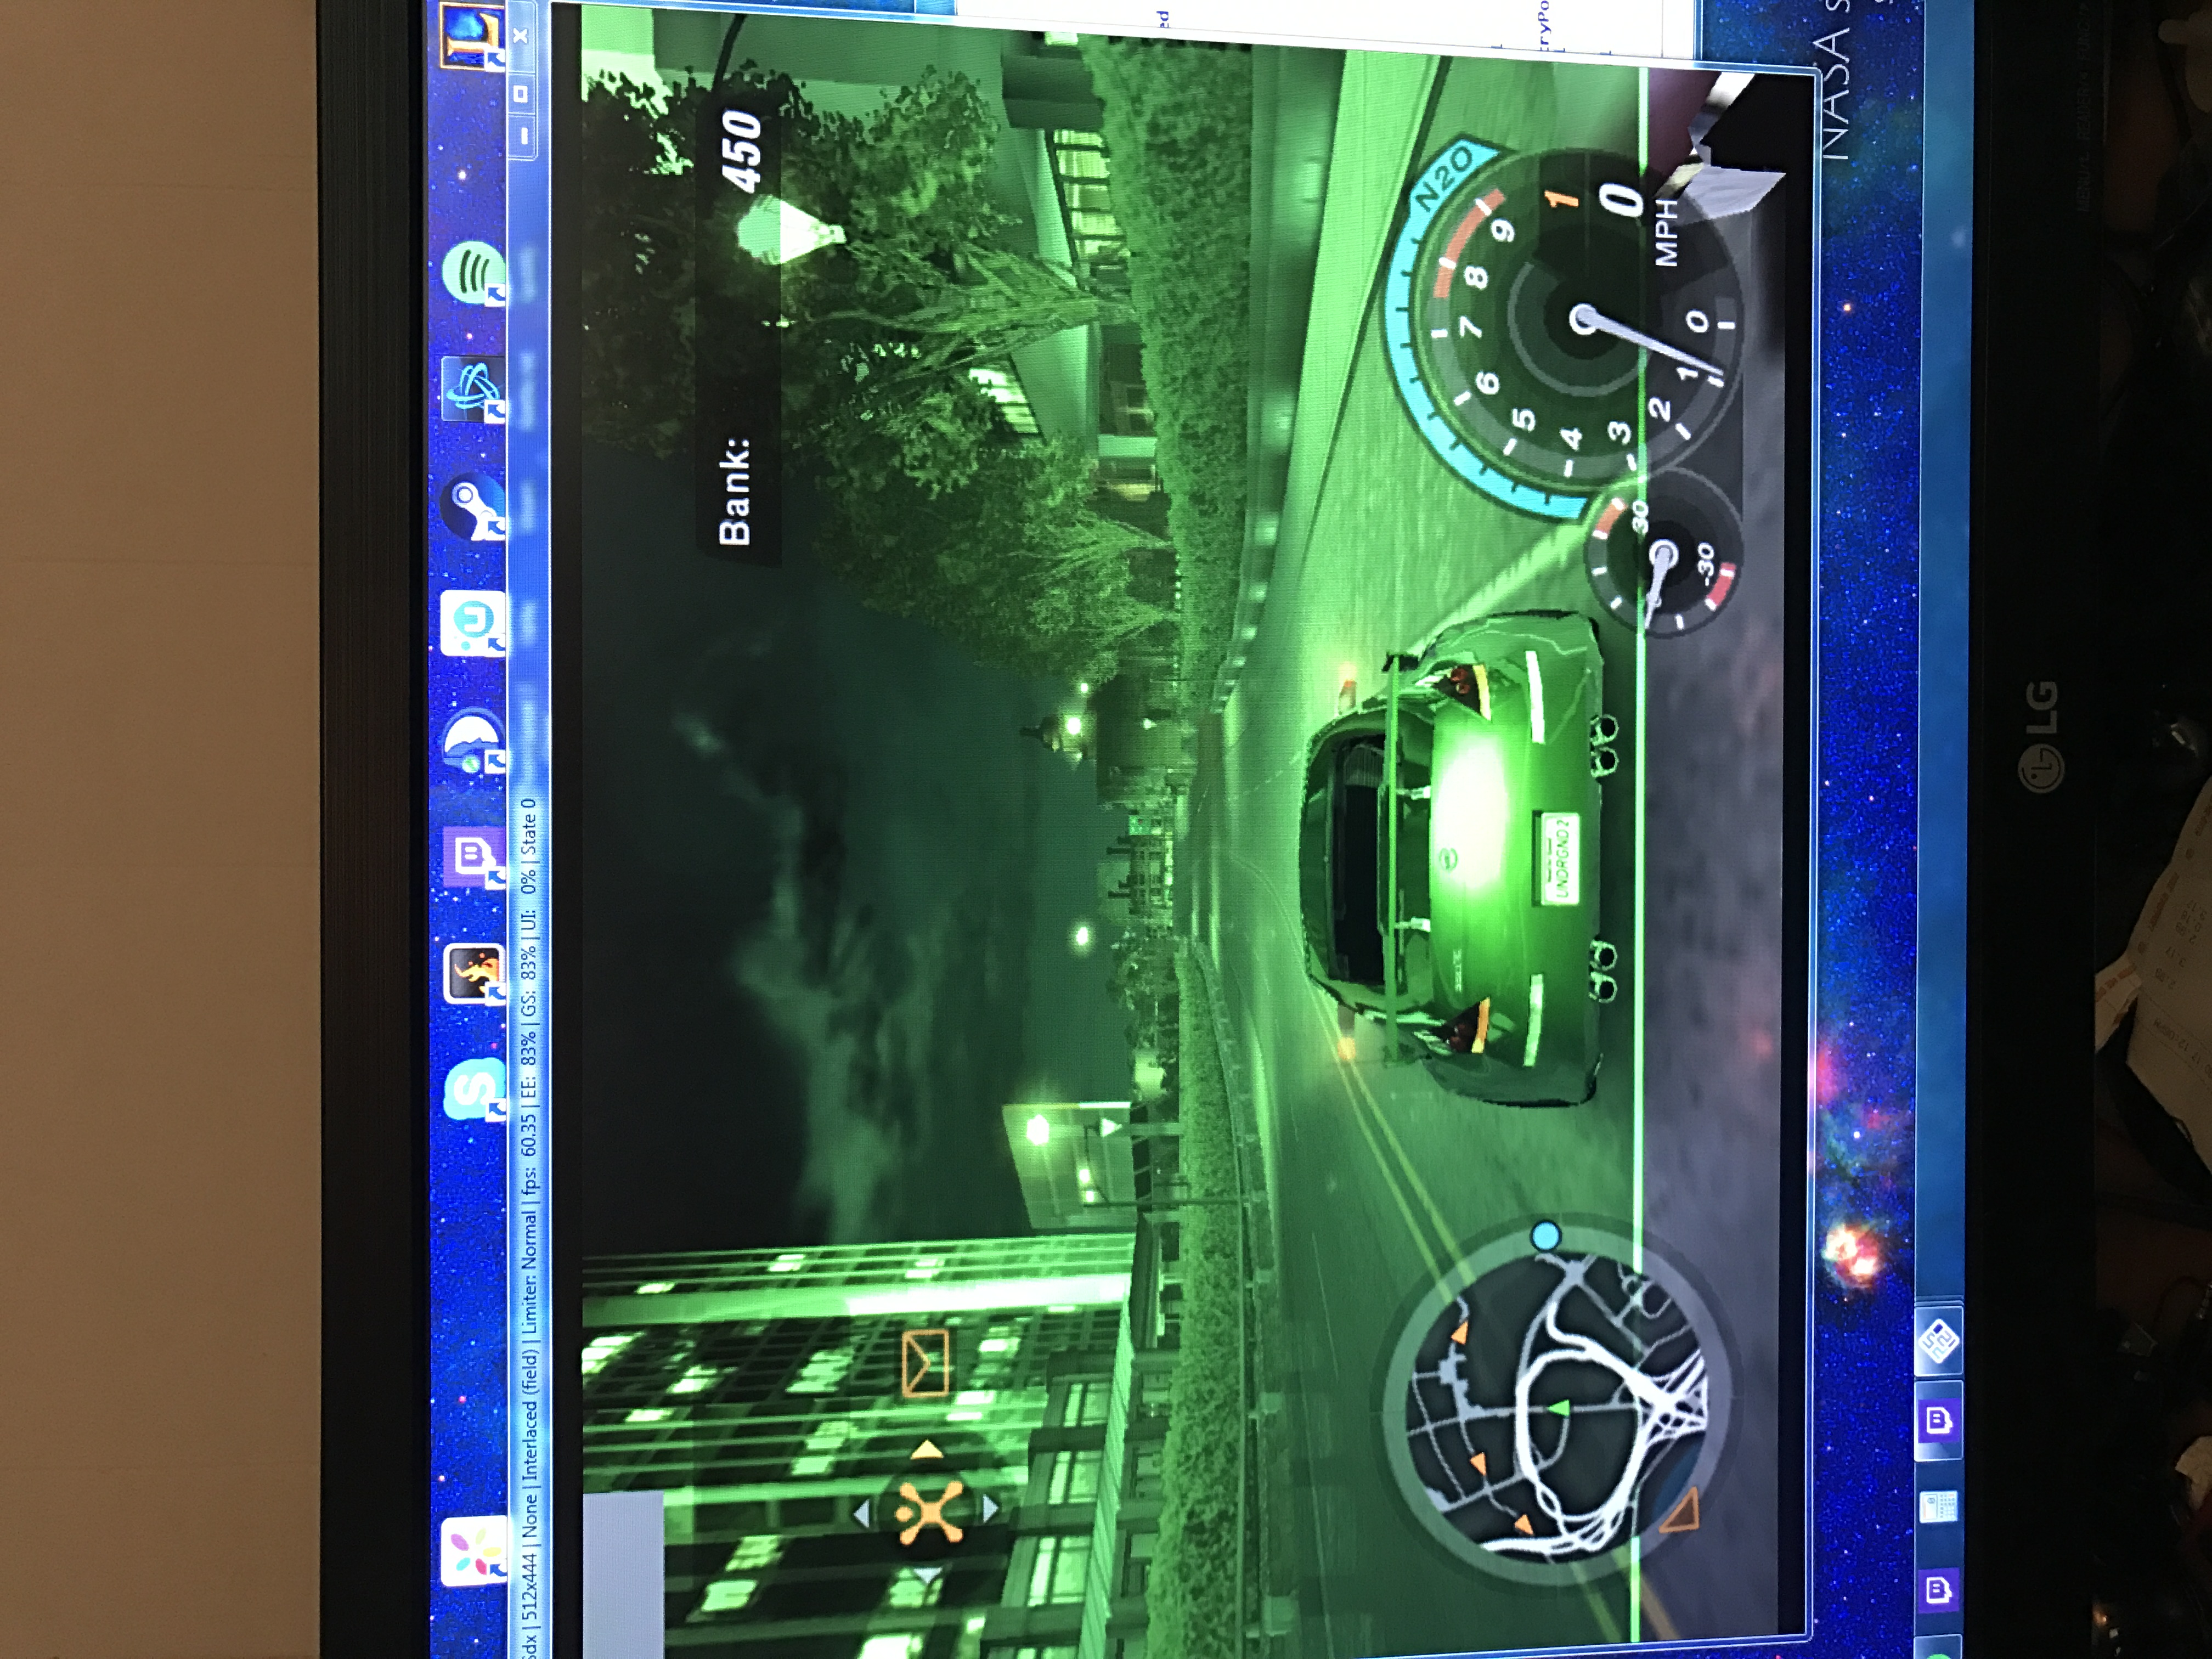 nfs underground 2 changes color in some places of the map in both emulators  : r/EmulationOnAndroid